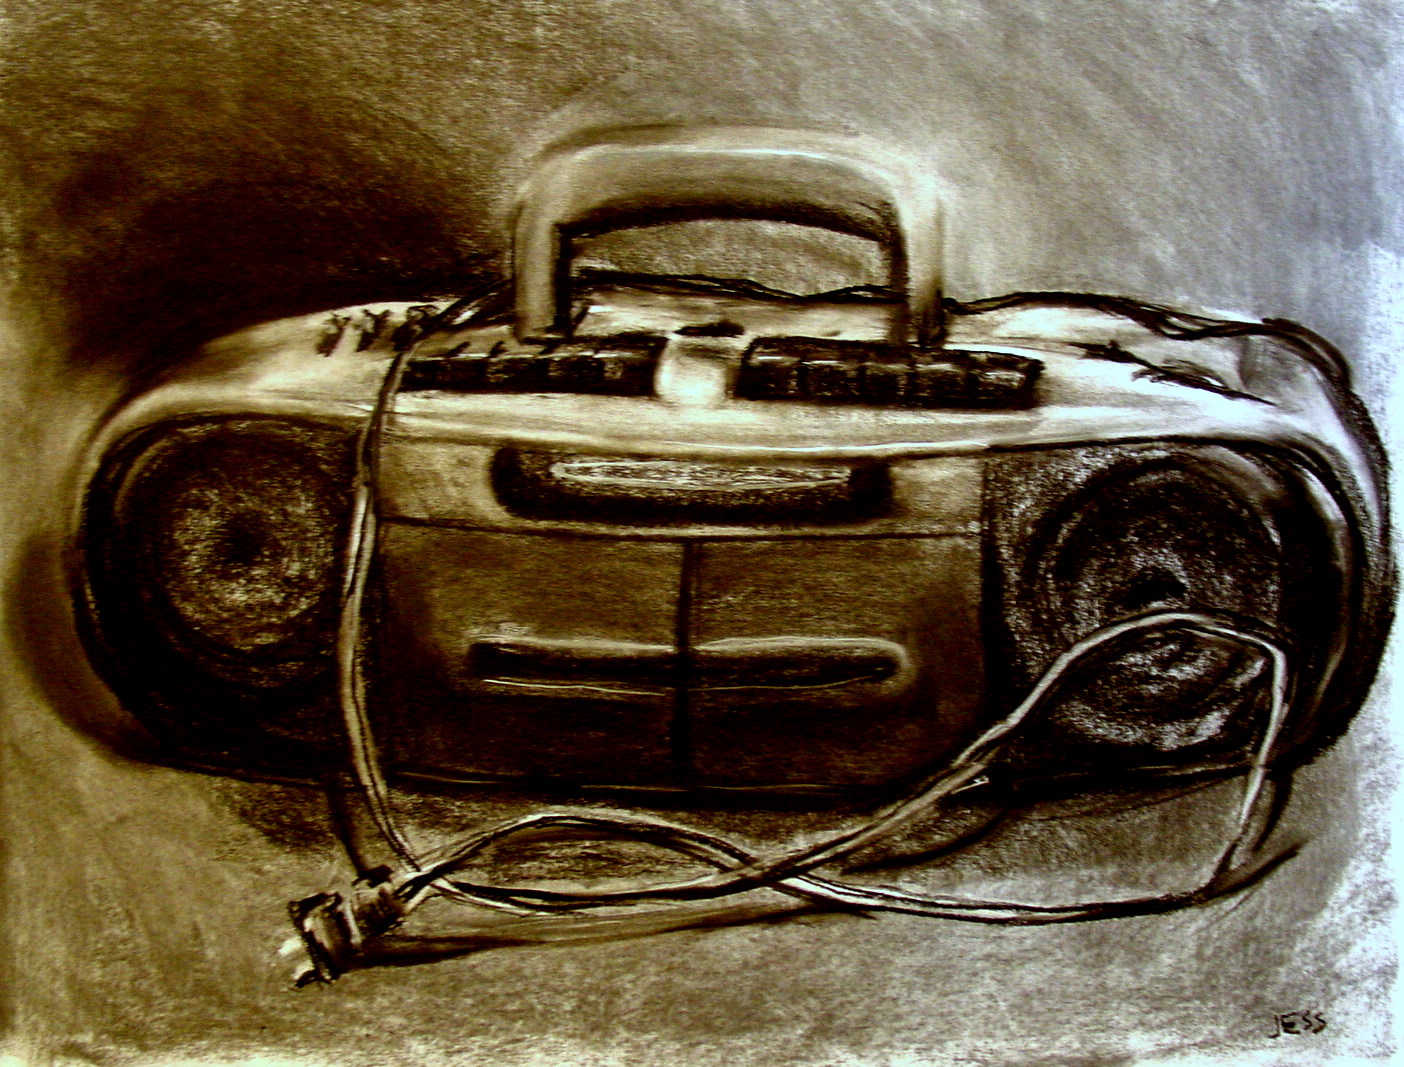 Boombox Still Life, charcoal on paper, 18x24 inches, Jessica Siemens 2009